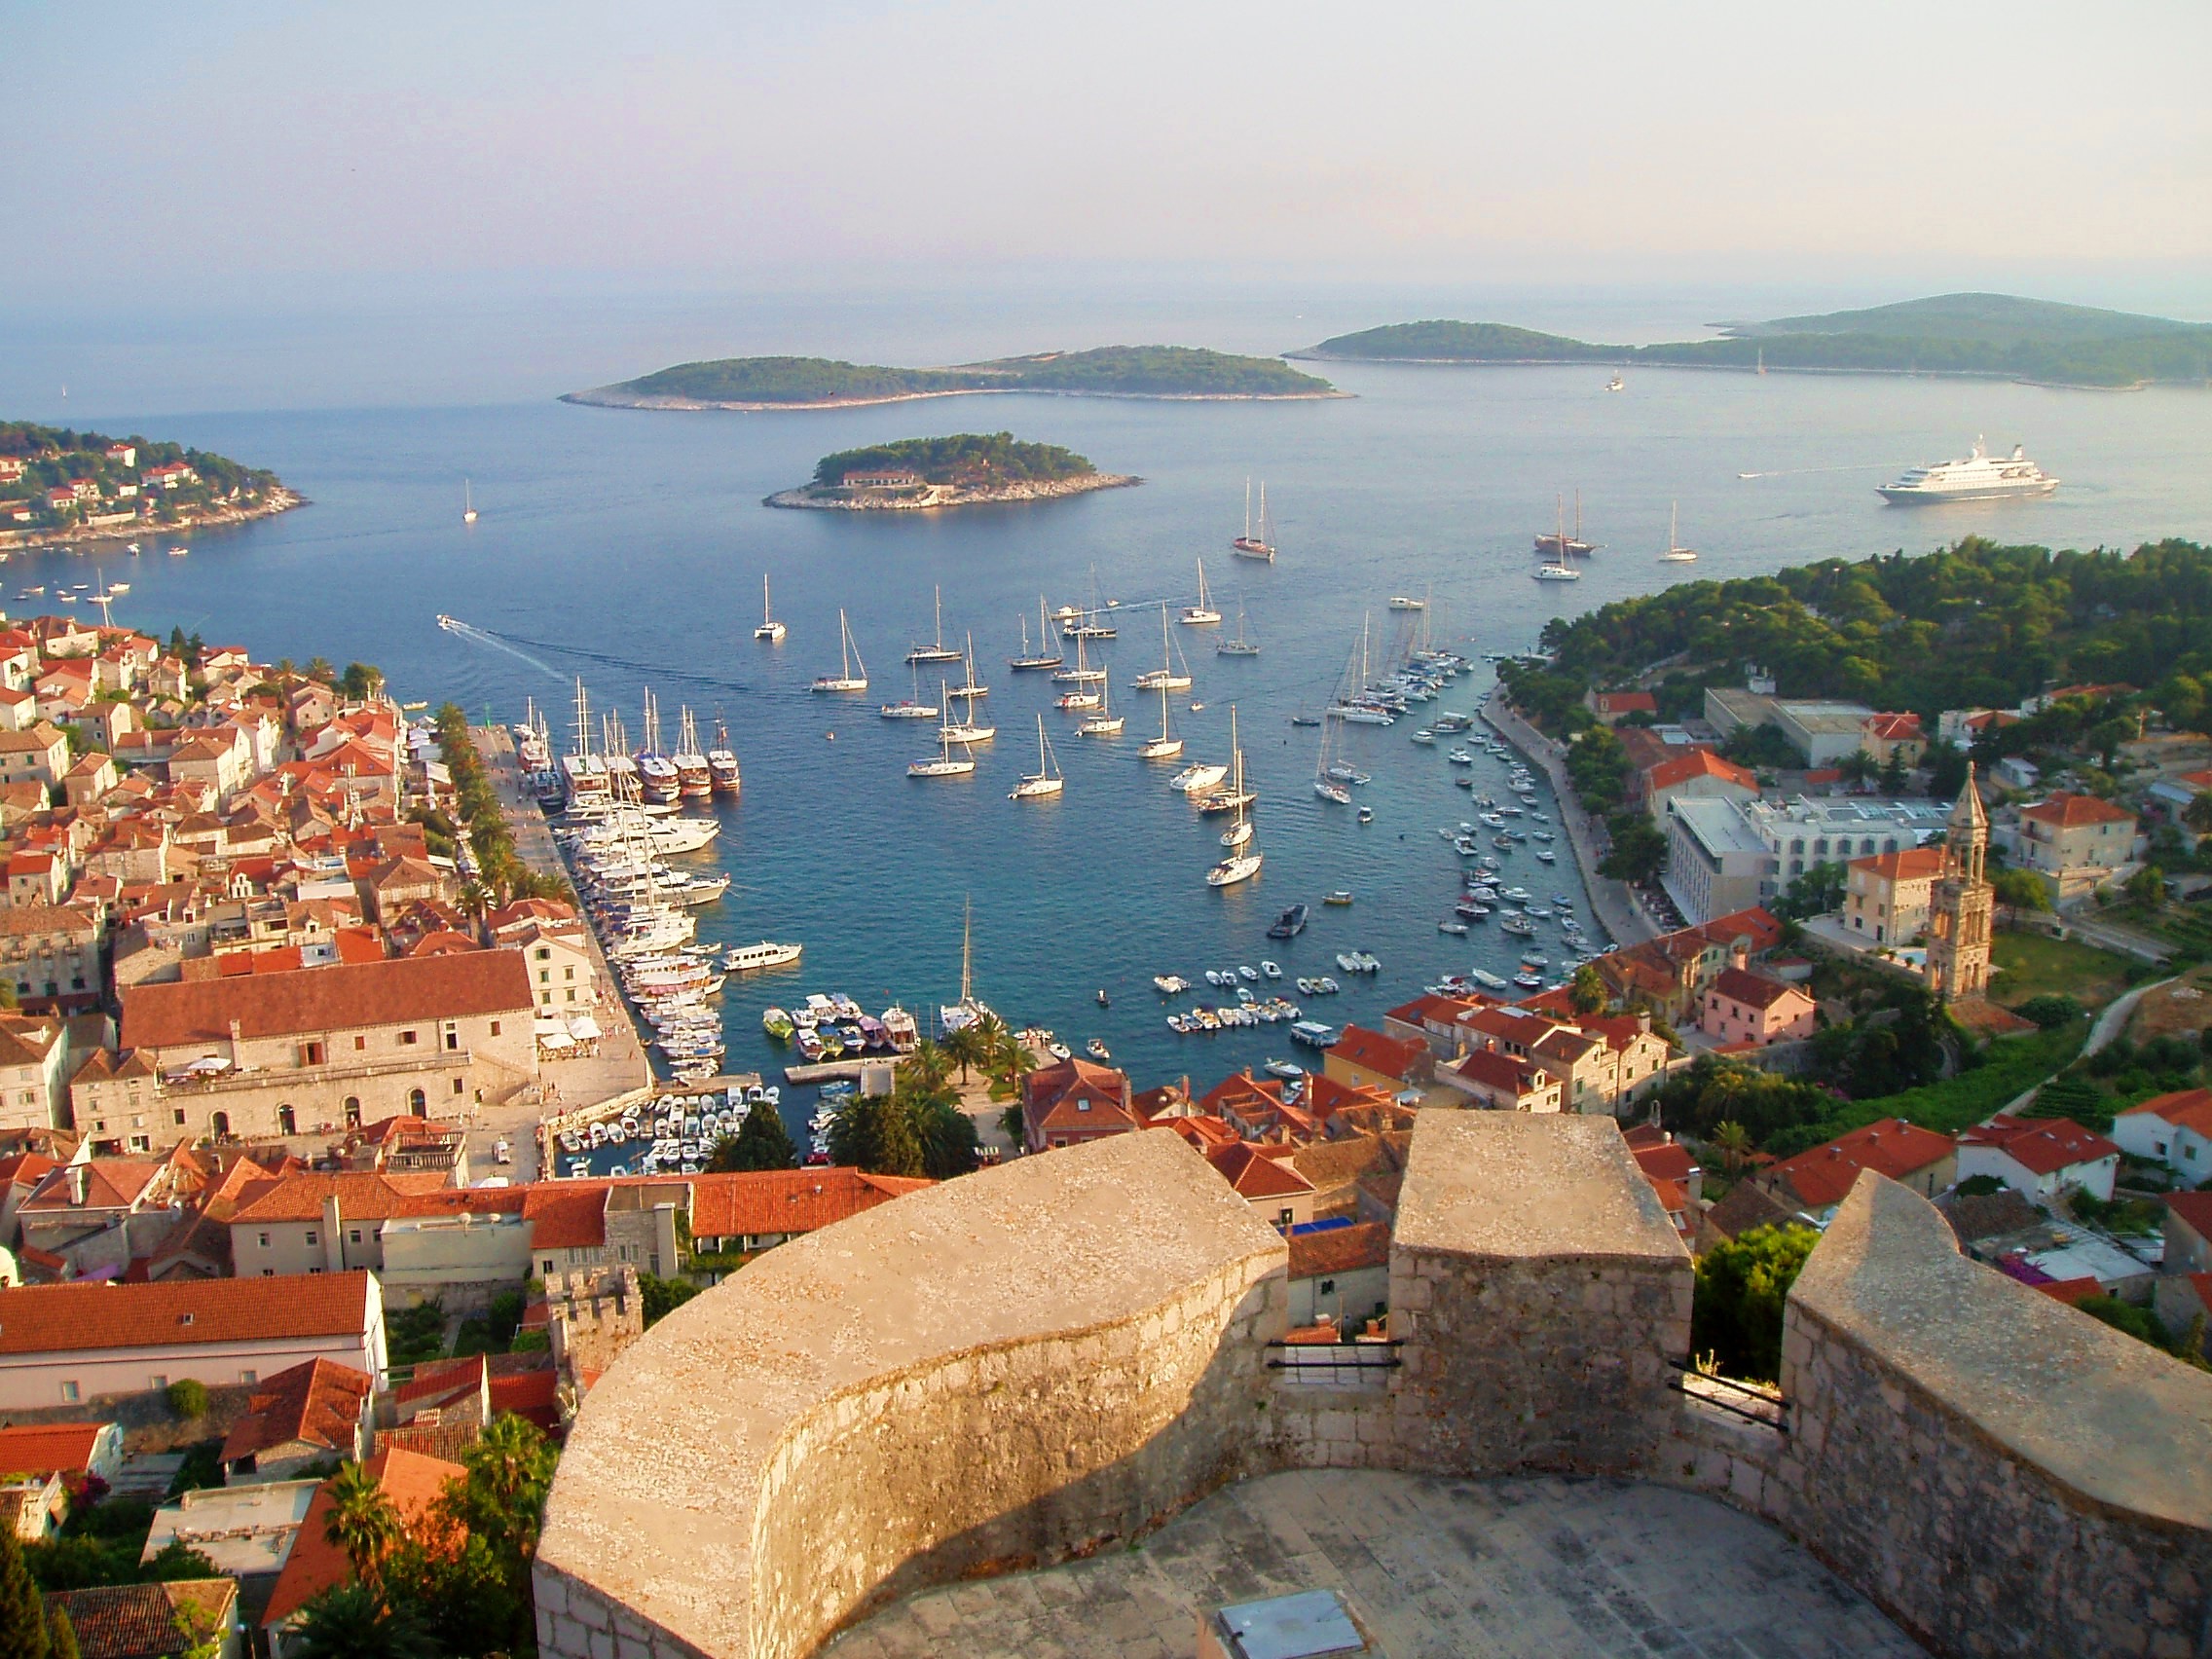 Hvar harbour and town view from the fortress